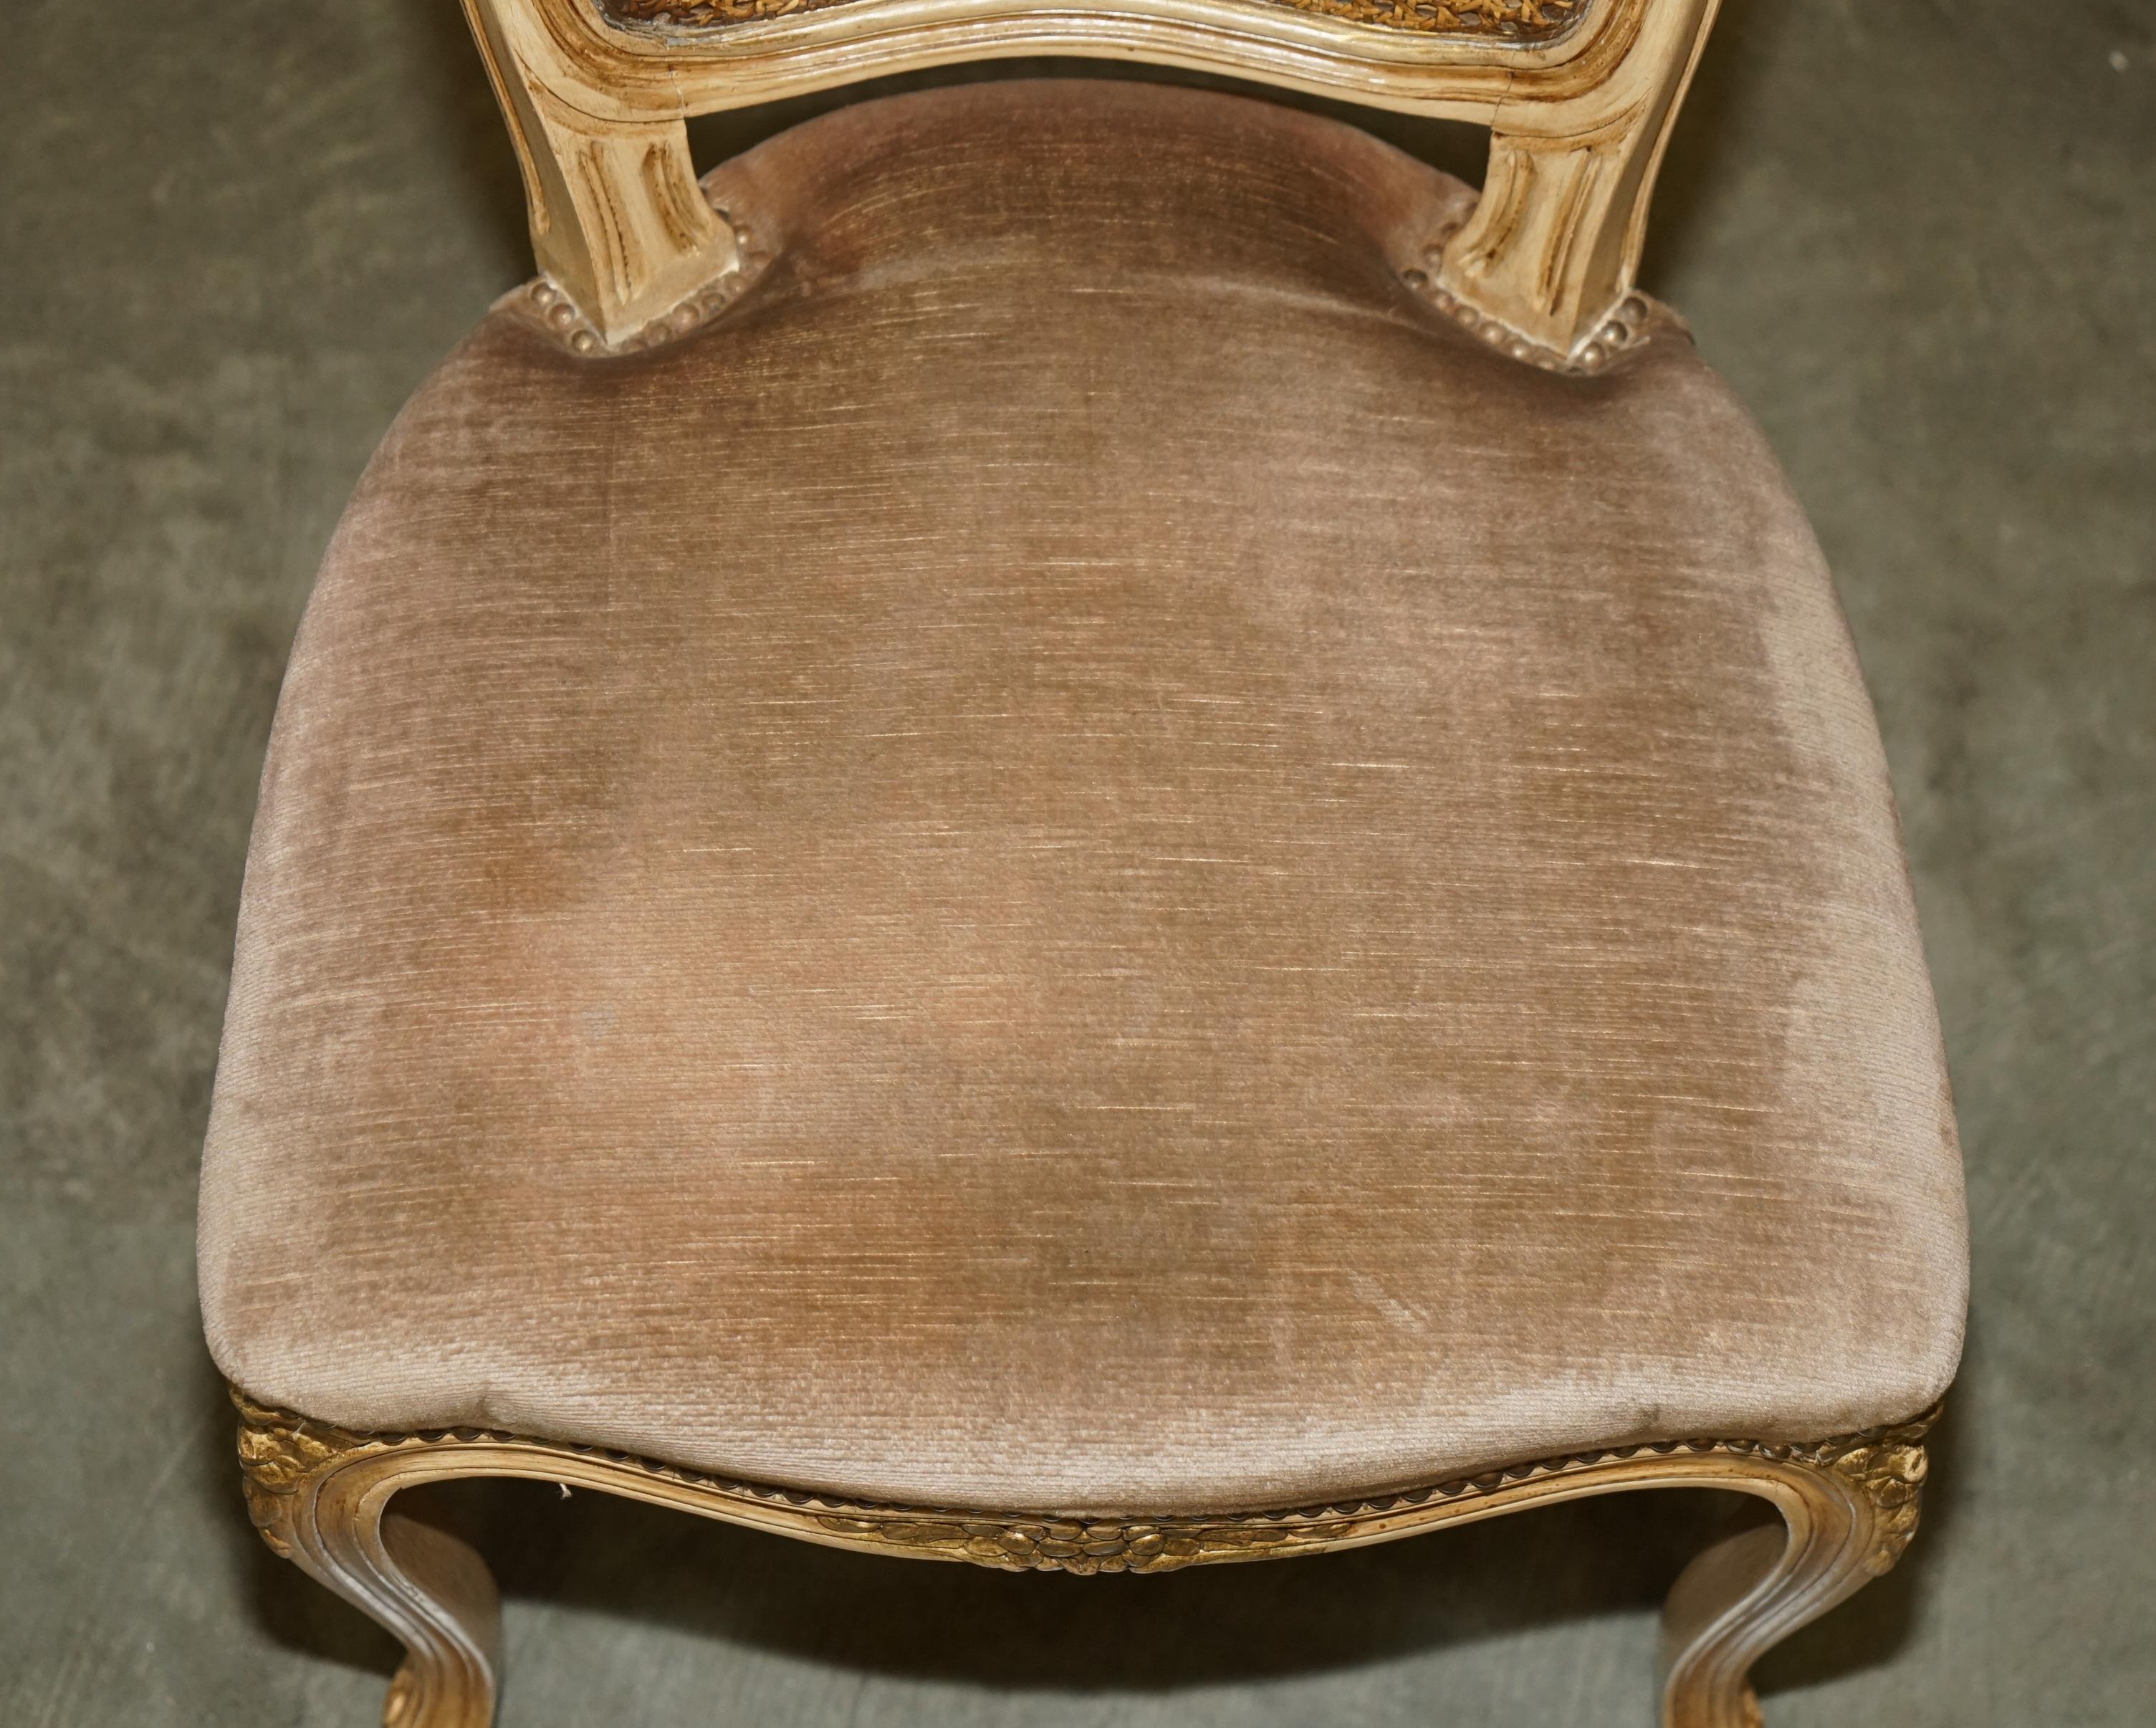 FOUR FINE ANTIQUE FRENCH BERGERE DiNING CHAIRS WITH PERIOD VELOUR UPHOLSTERY For Sale 13